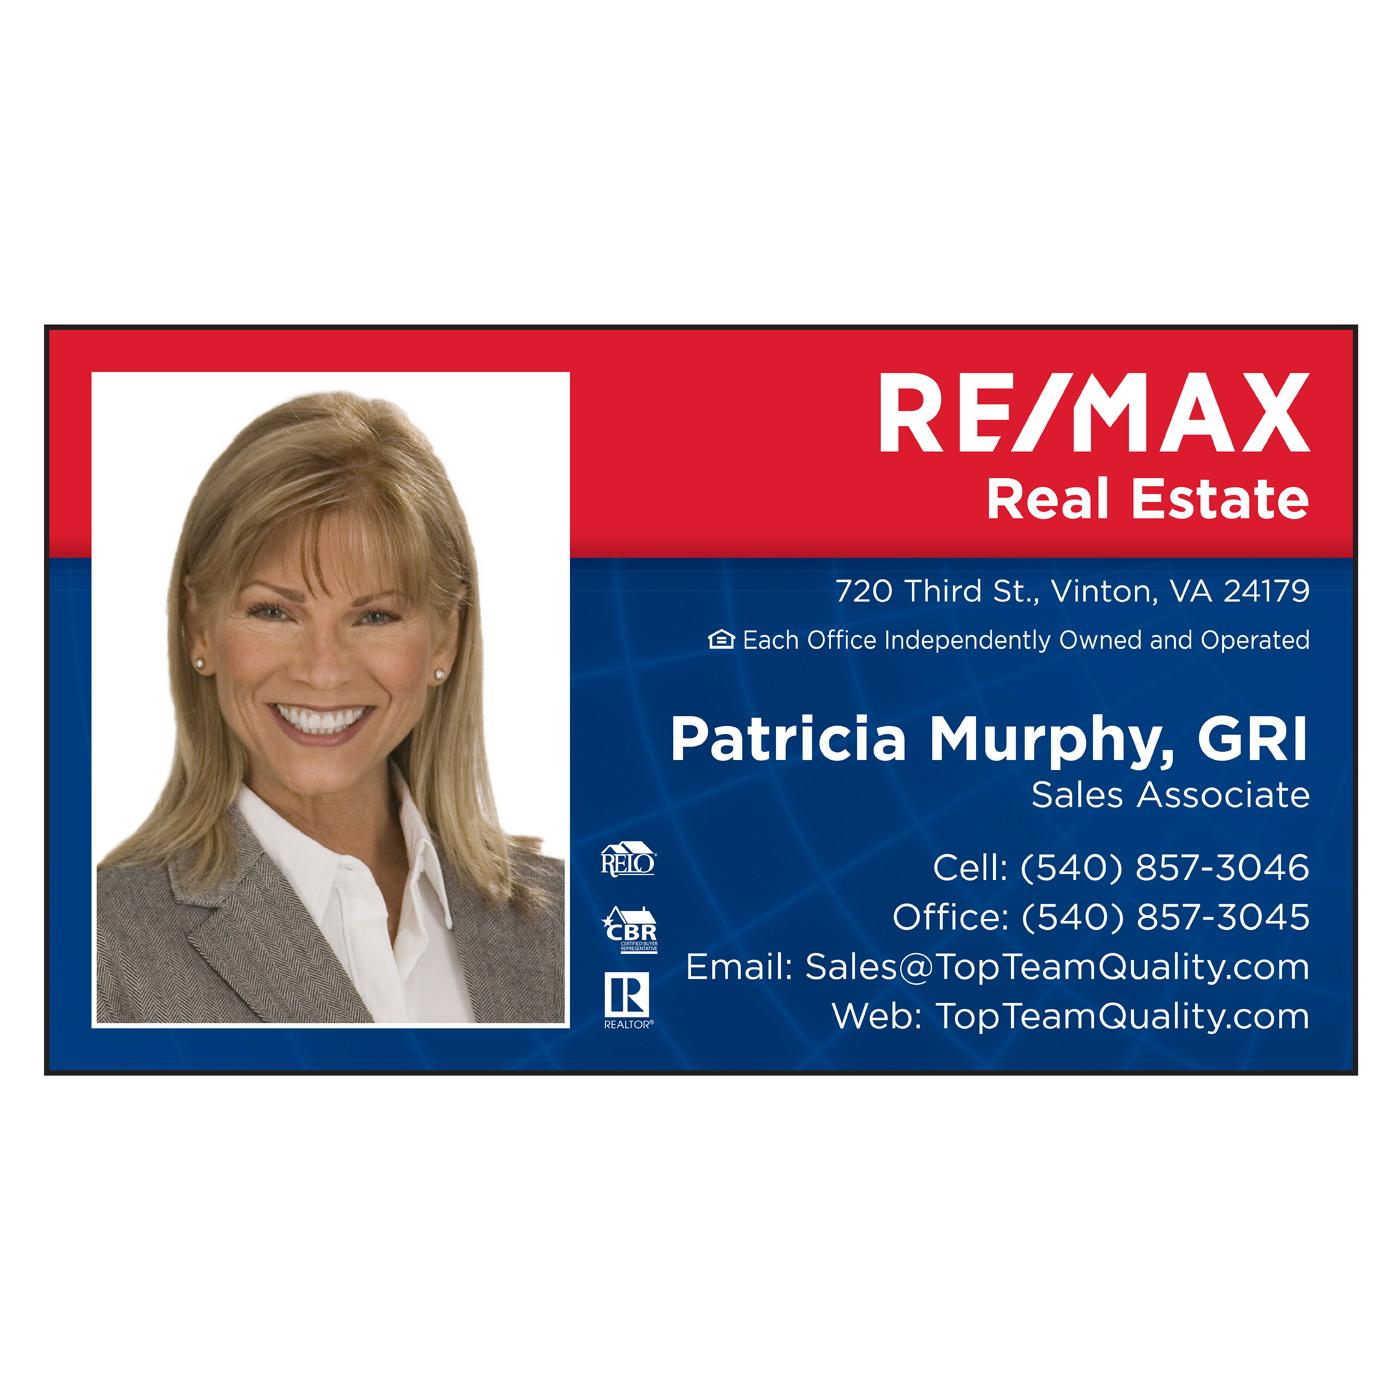 RE/MAX Standard Business Card